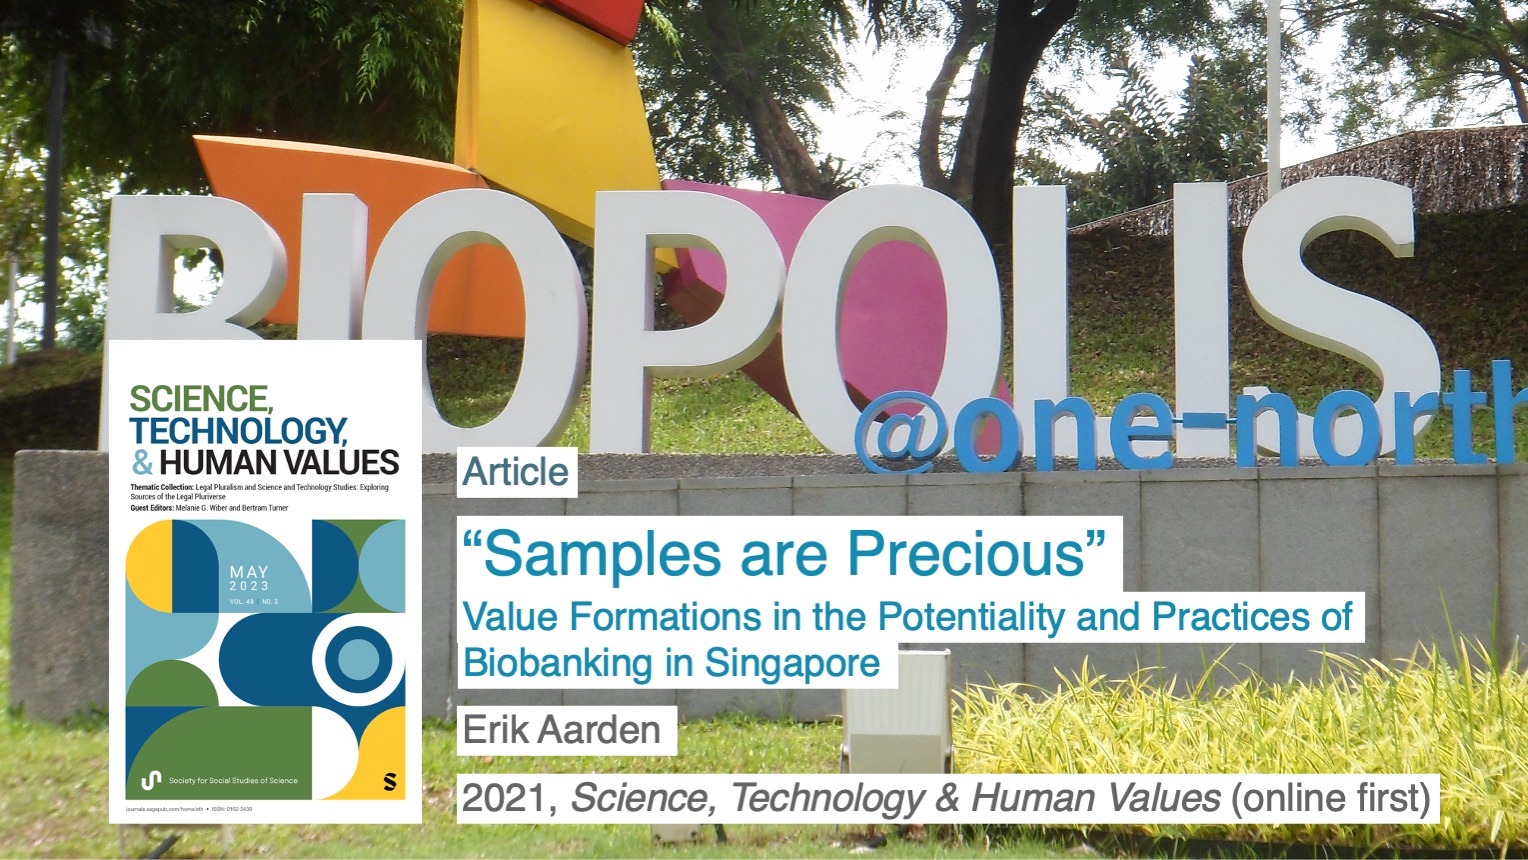 Erik Aarden: "Samples ar Precious". Value Formations in the Potentiality and Practices of Biobanking in Singapore. 2021, Science, Technology & Human Values.